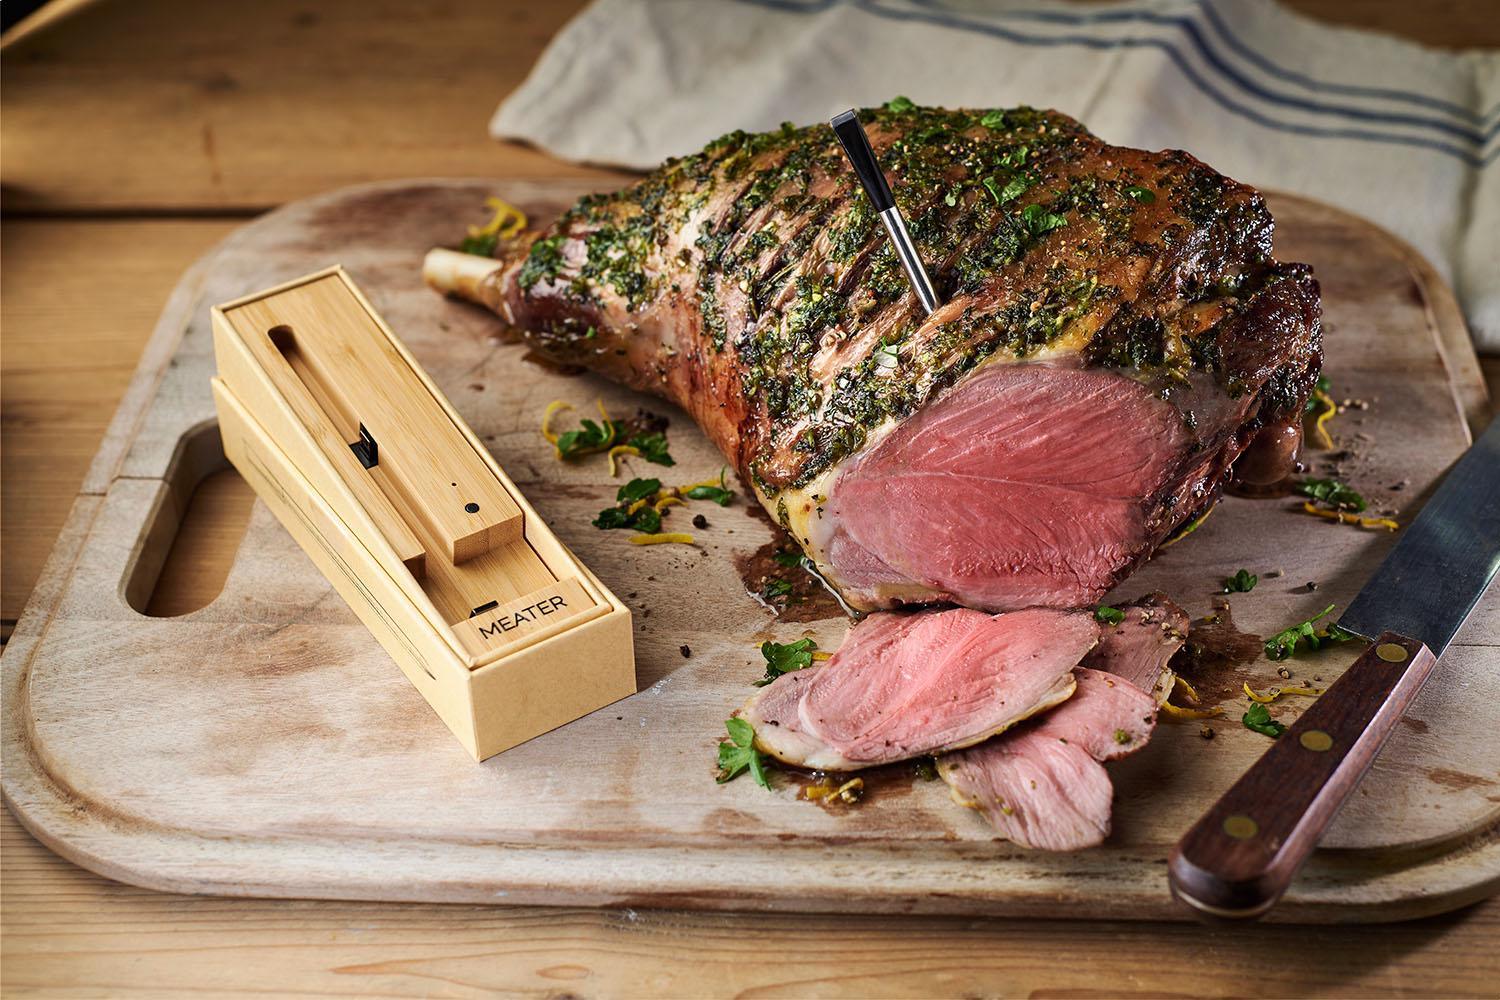 MEATER: The Ultimate Smart Meat Thermometer for Perfectly Cooked